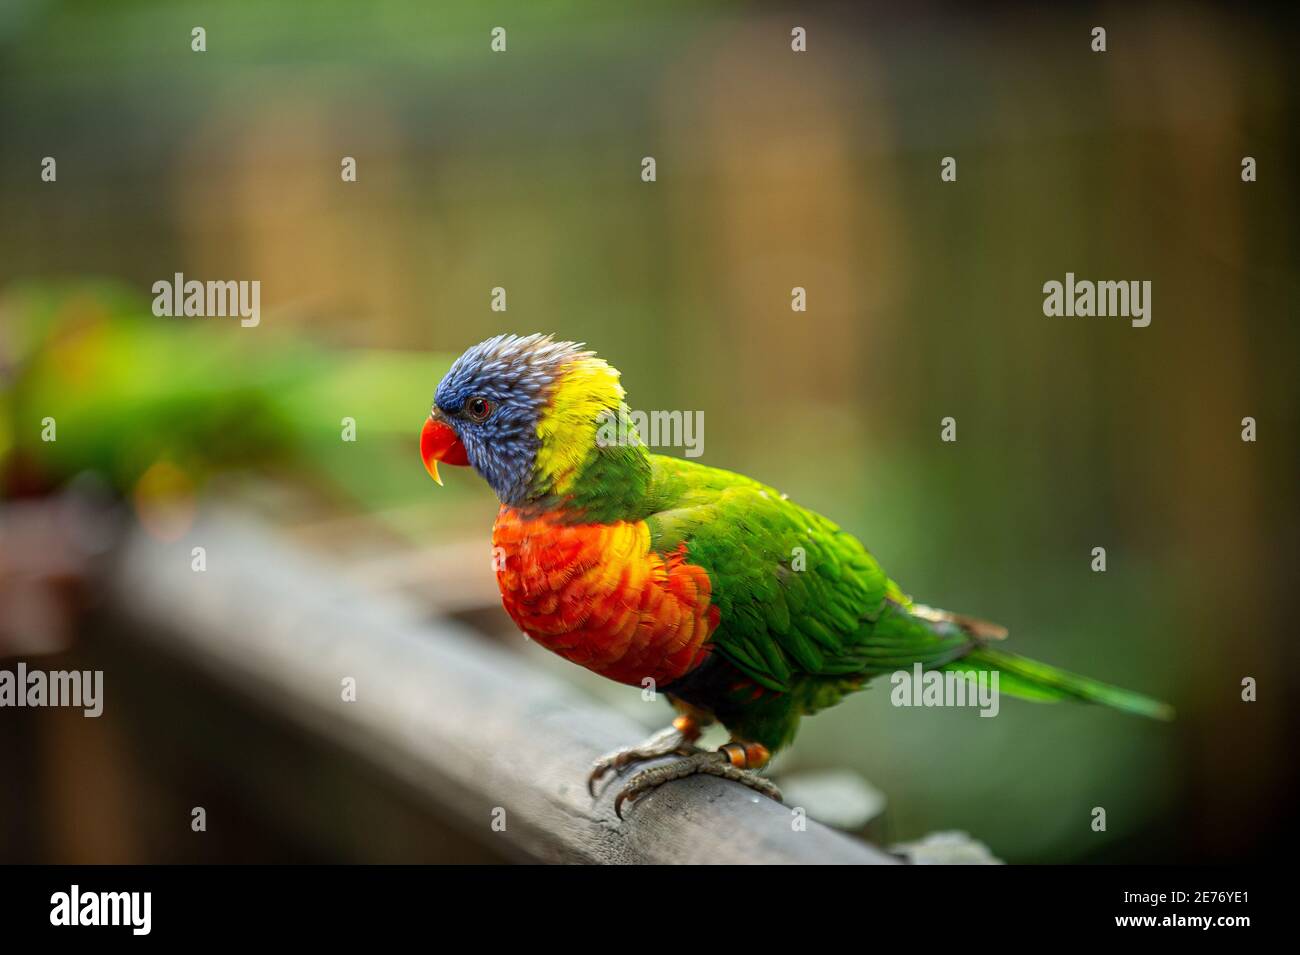 A colorful parrot bird standing on a wooden balcony at the zoo. Forest background blurred and beautiful bokeh. Stock Photo